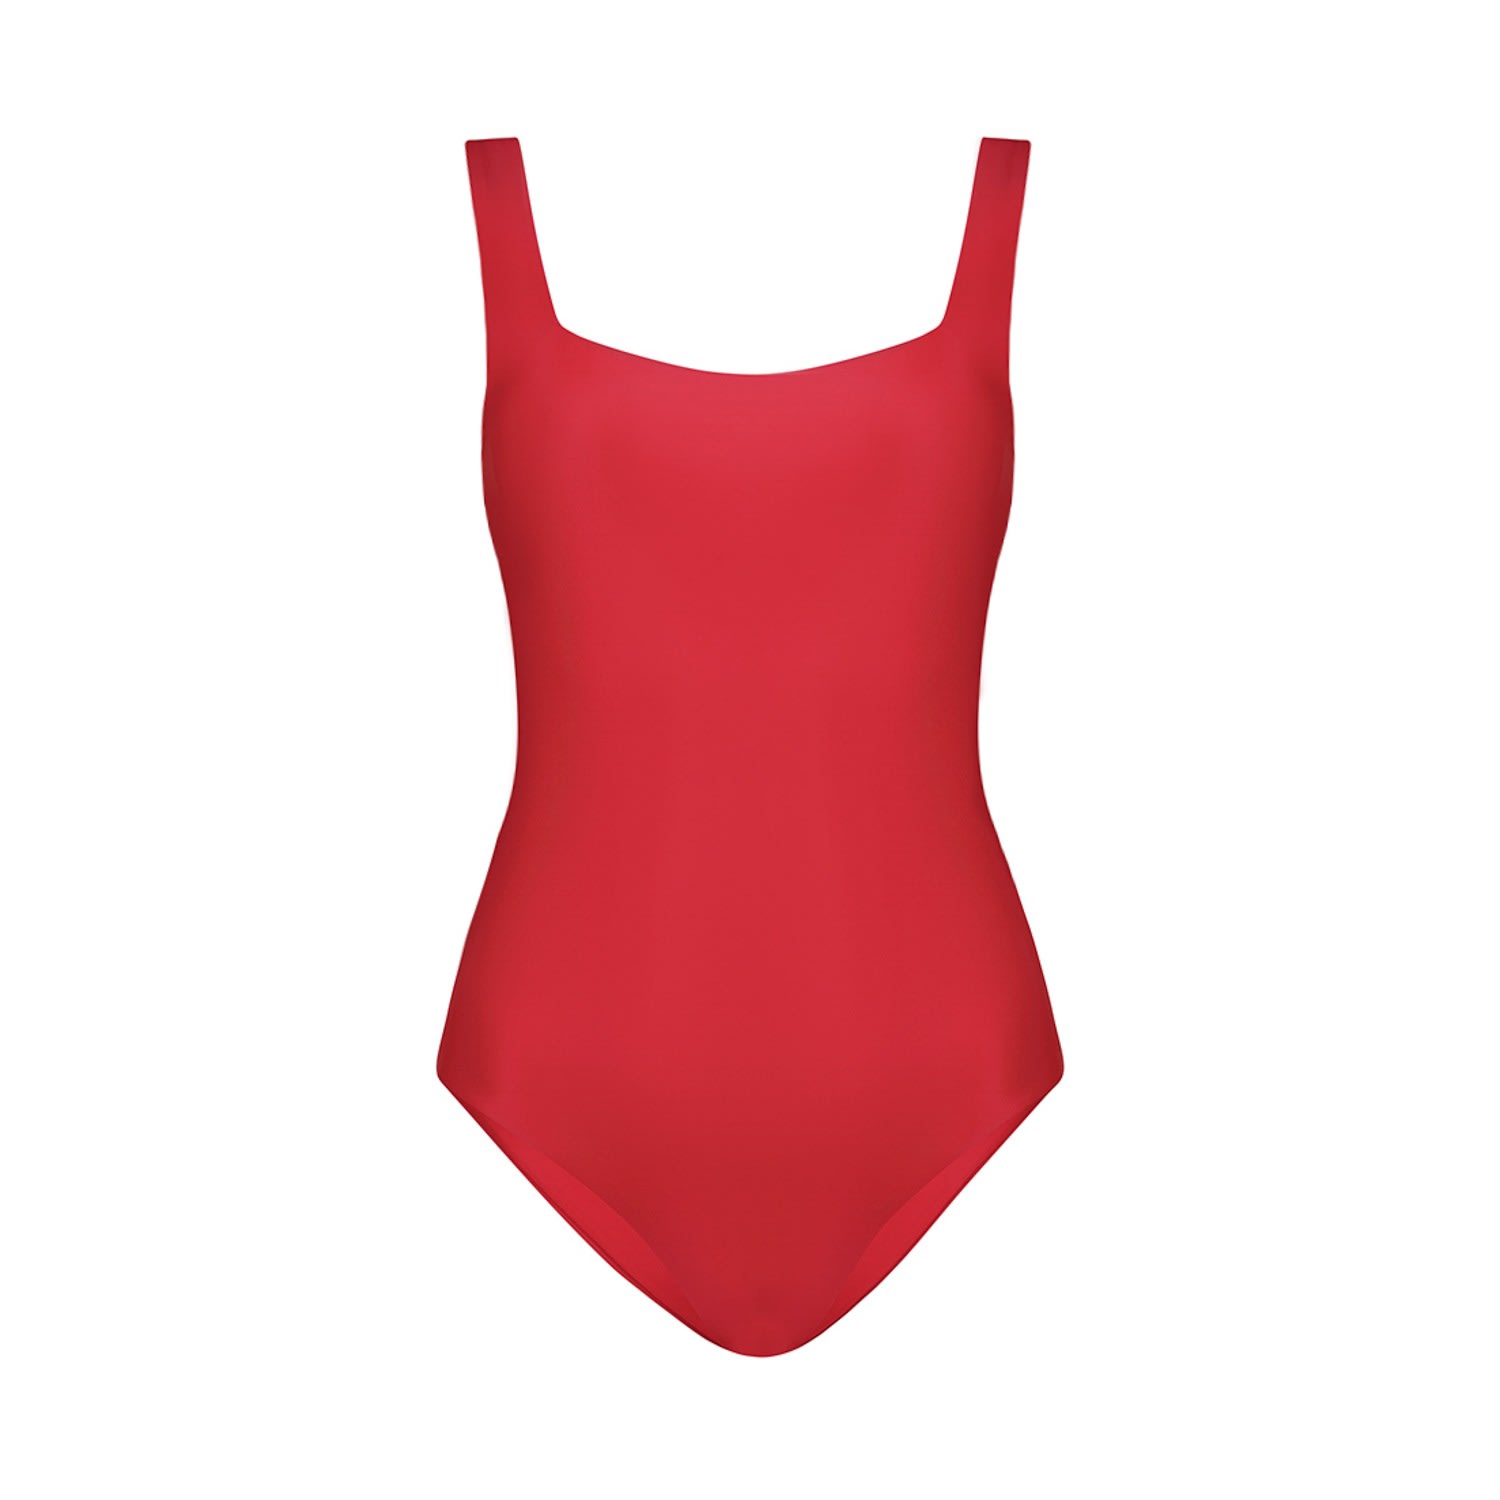 Women's Helena One Piece Swimsuit - Red Extra Small EDOS